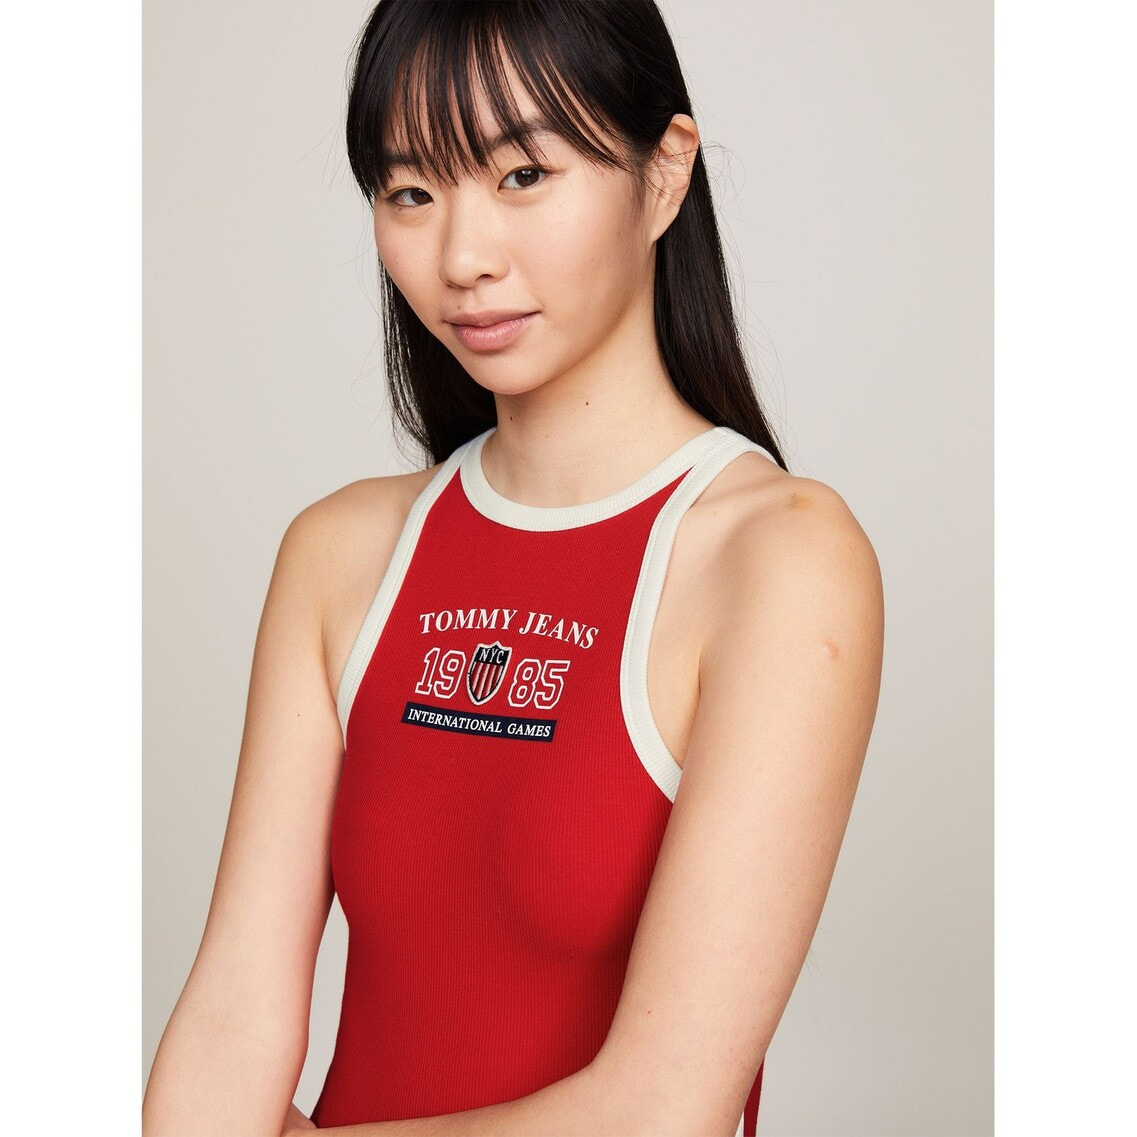 Tommy Jeans International Games ワンピース | TOMMY HILFIGER 